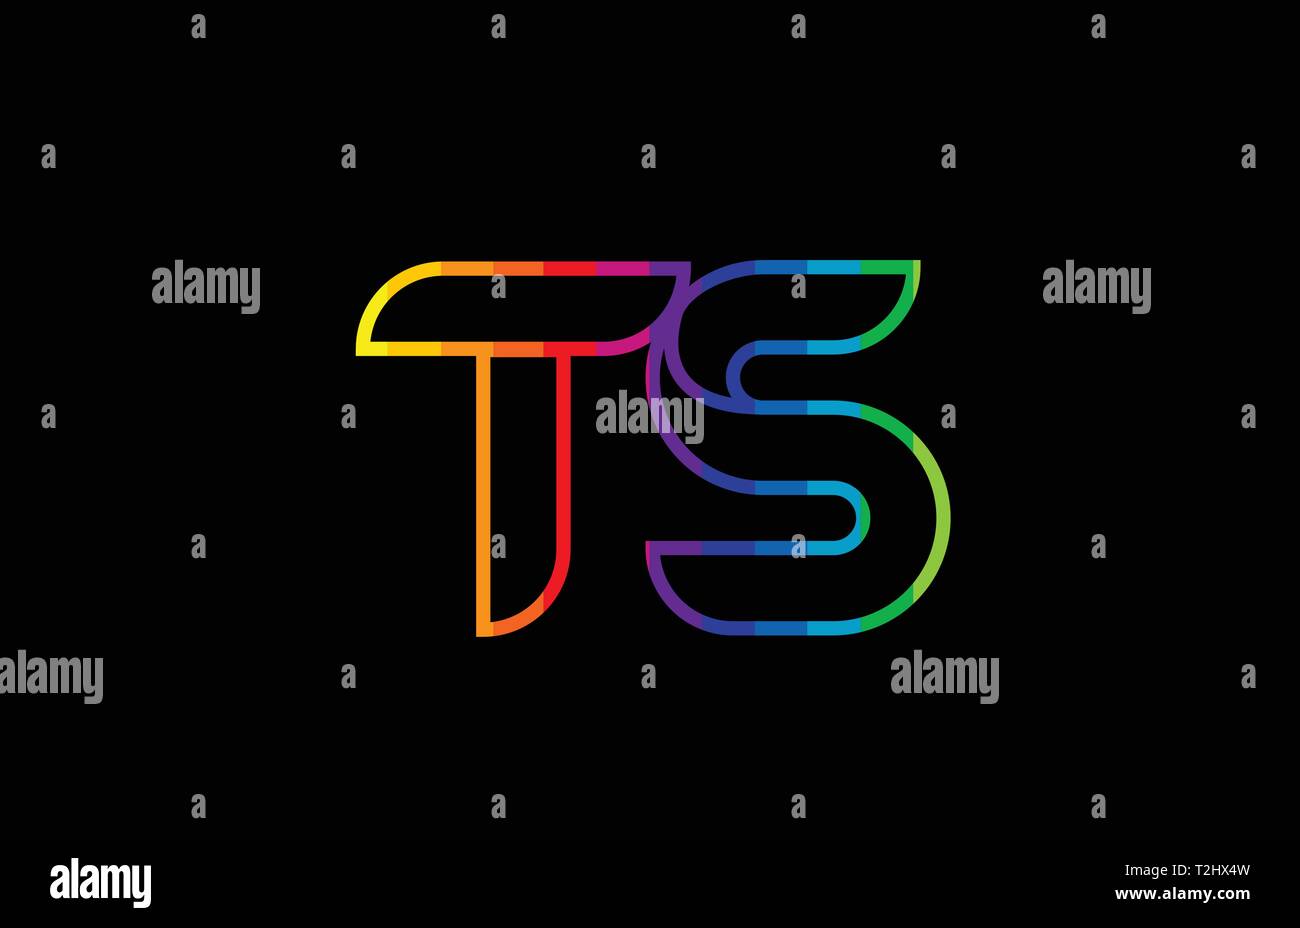 rainbow color colored colorful alphabet letter ts t s logo combination design suitable for a company or business Stock Vector